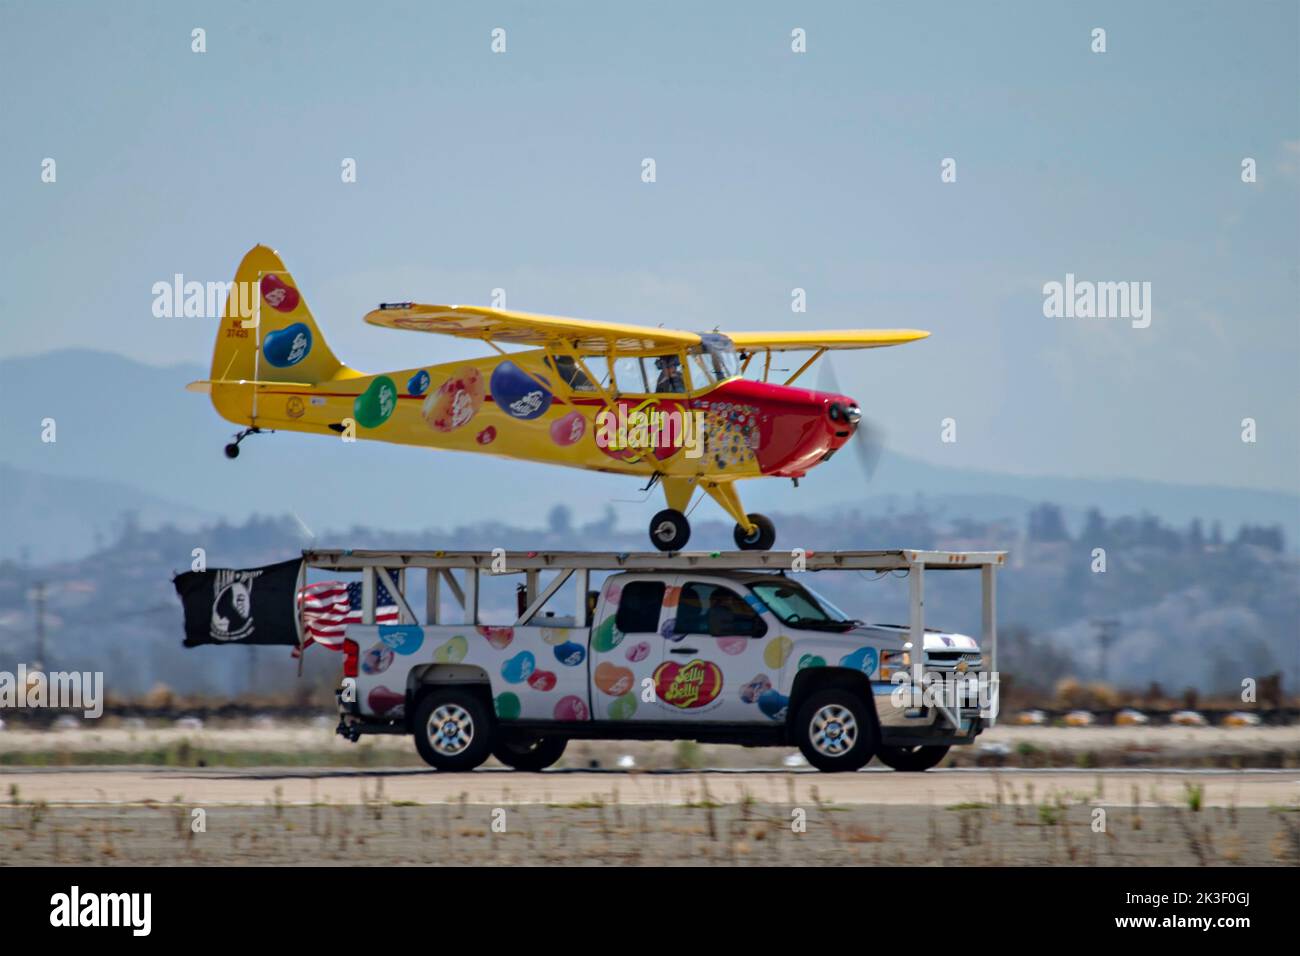 Kent Pietsch, piloting his Interstate Cadet, lands on the roof of a pickup truck as he performs aerobatics during the 2022 Miramar Air Show at MCAS Miramar, September 24, 2022 in San Diego, California. Stock Photo